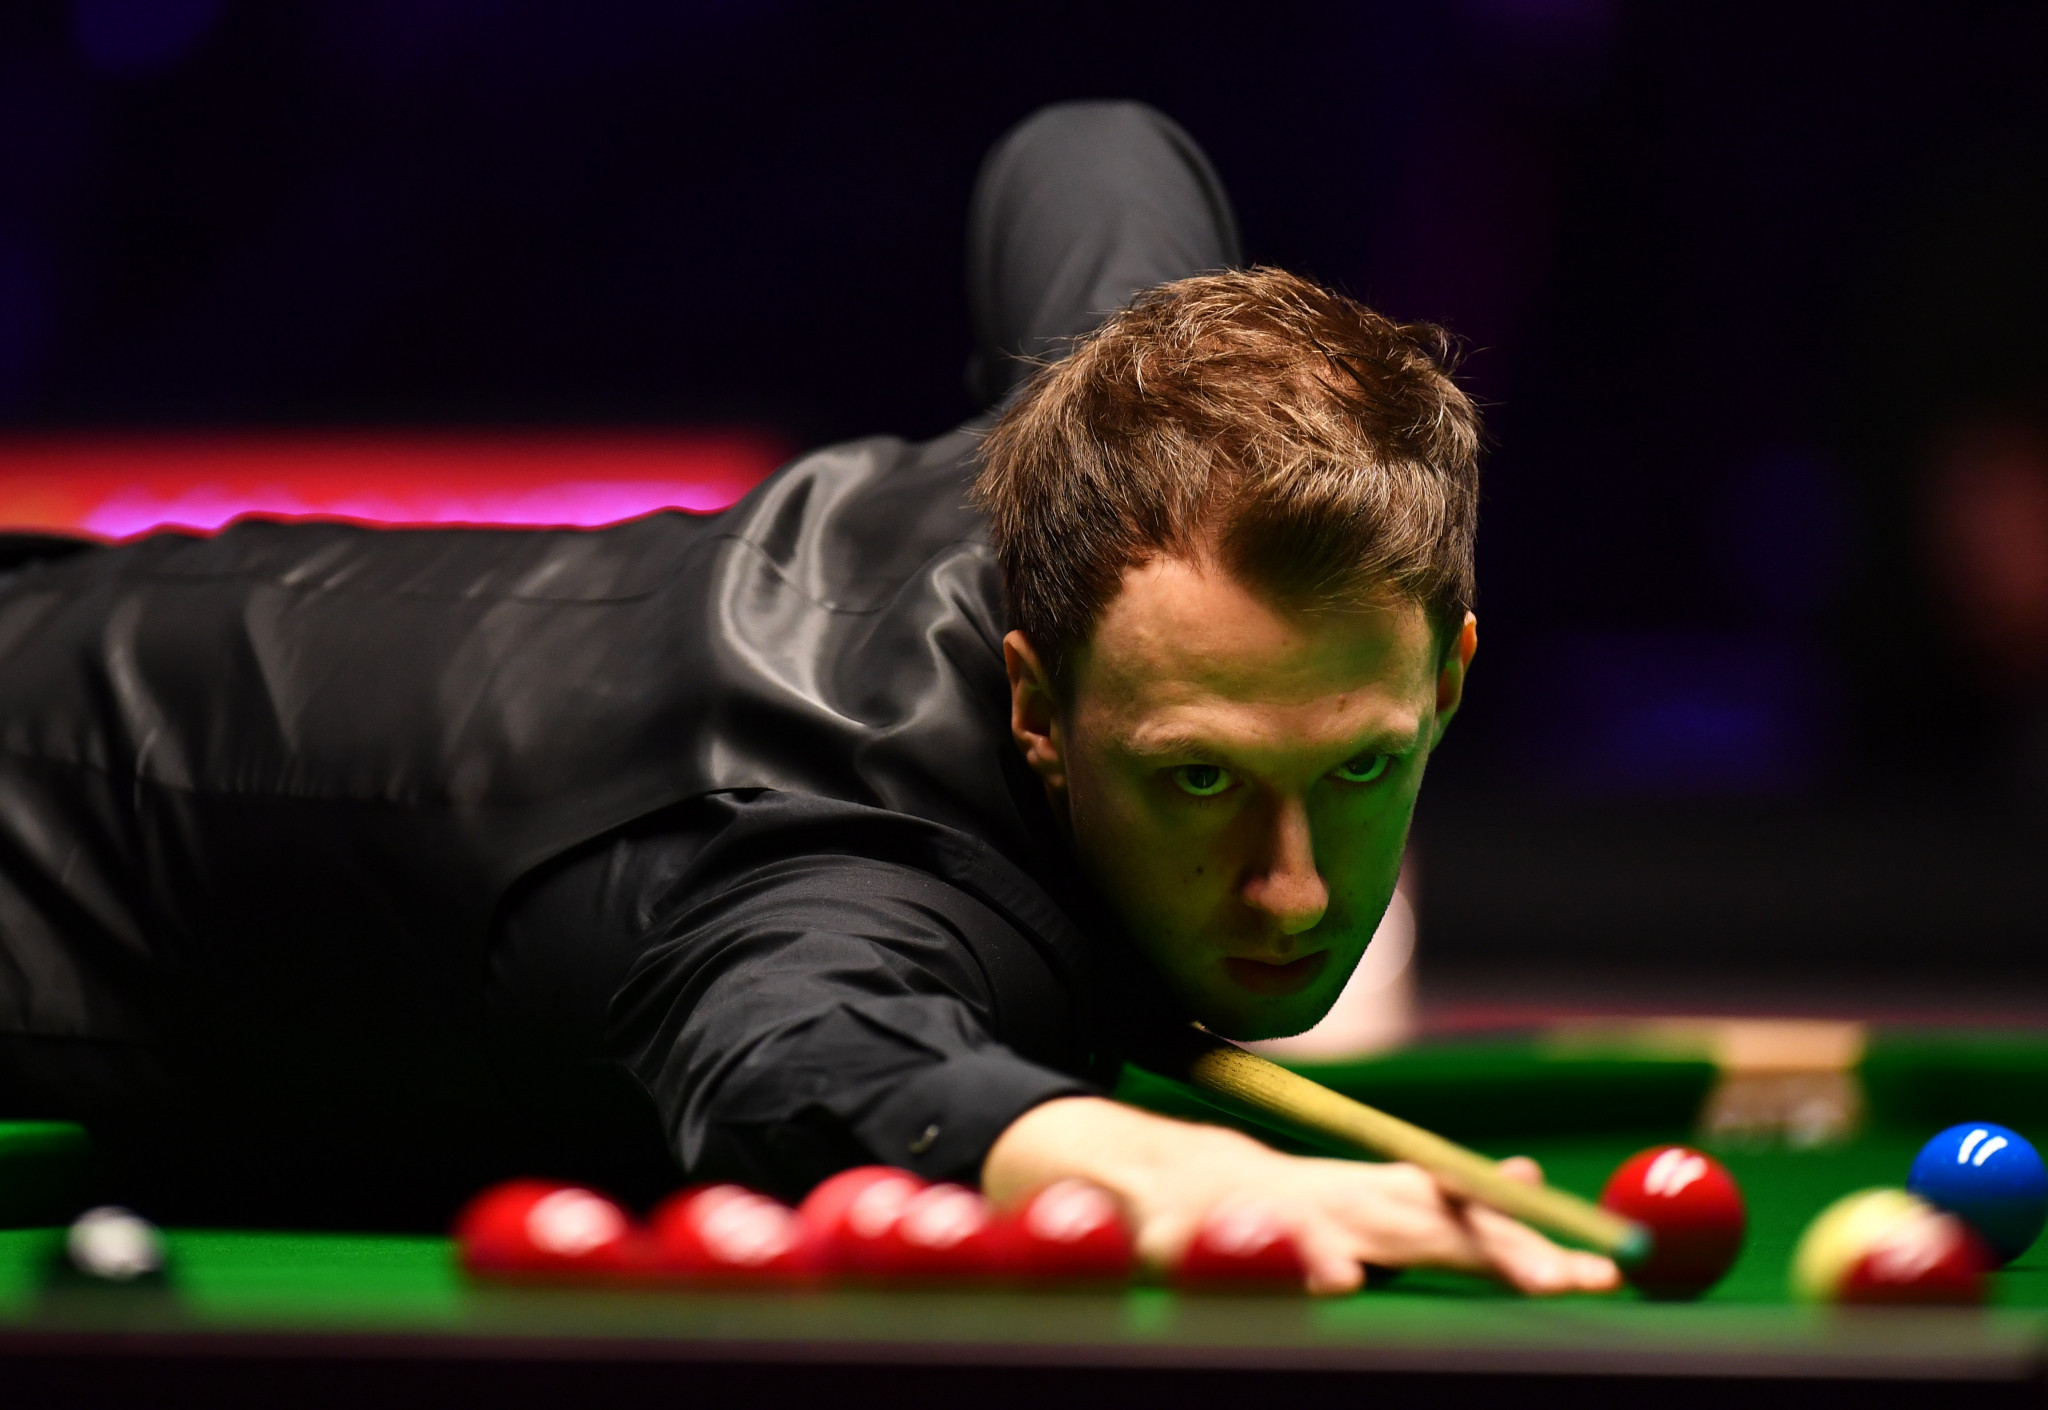 England's Judd Trump looks set for a last four spot in the World Snooker Championship at the Crucible in Sheffield ©Getty Images